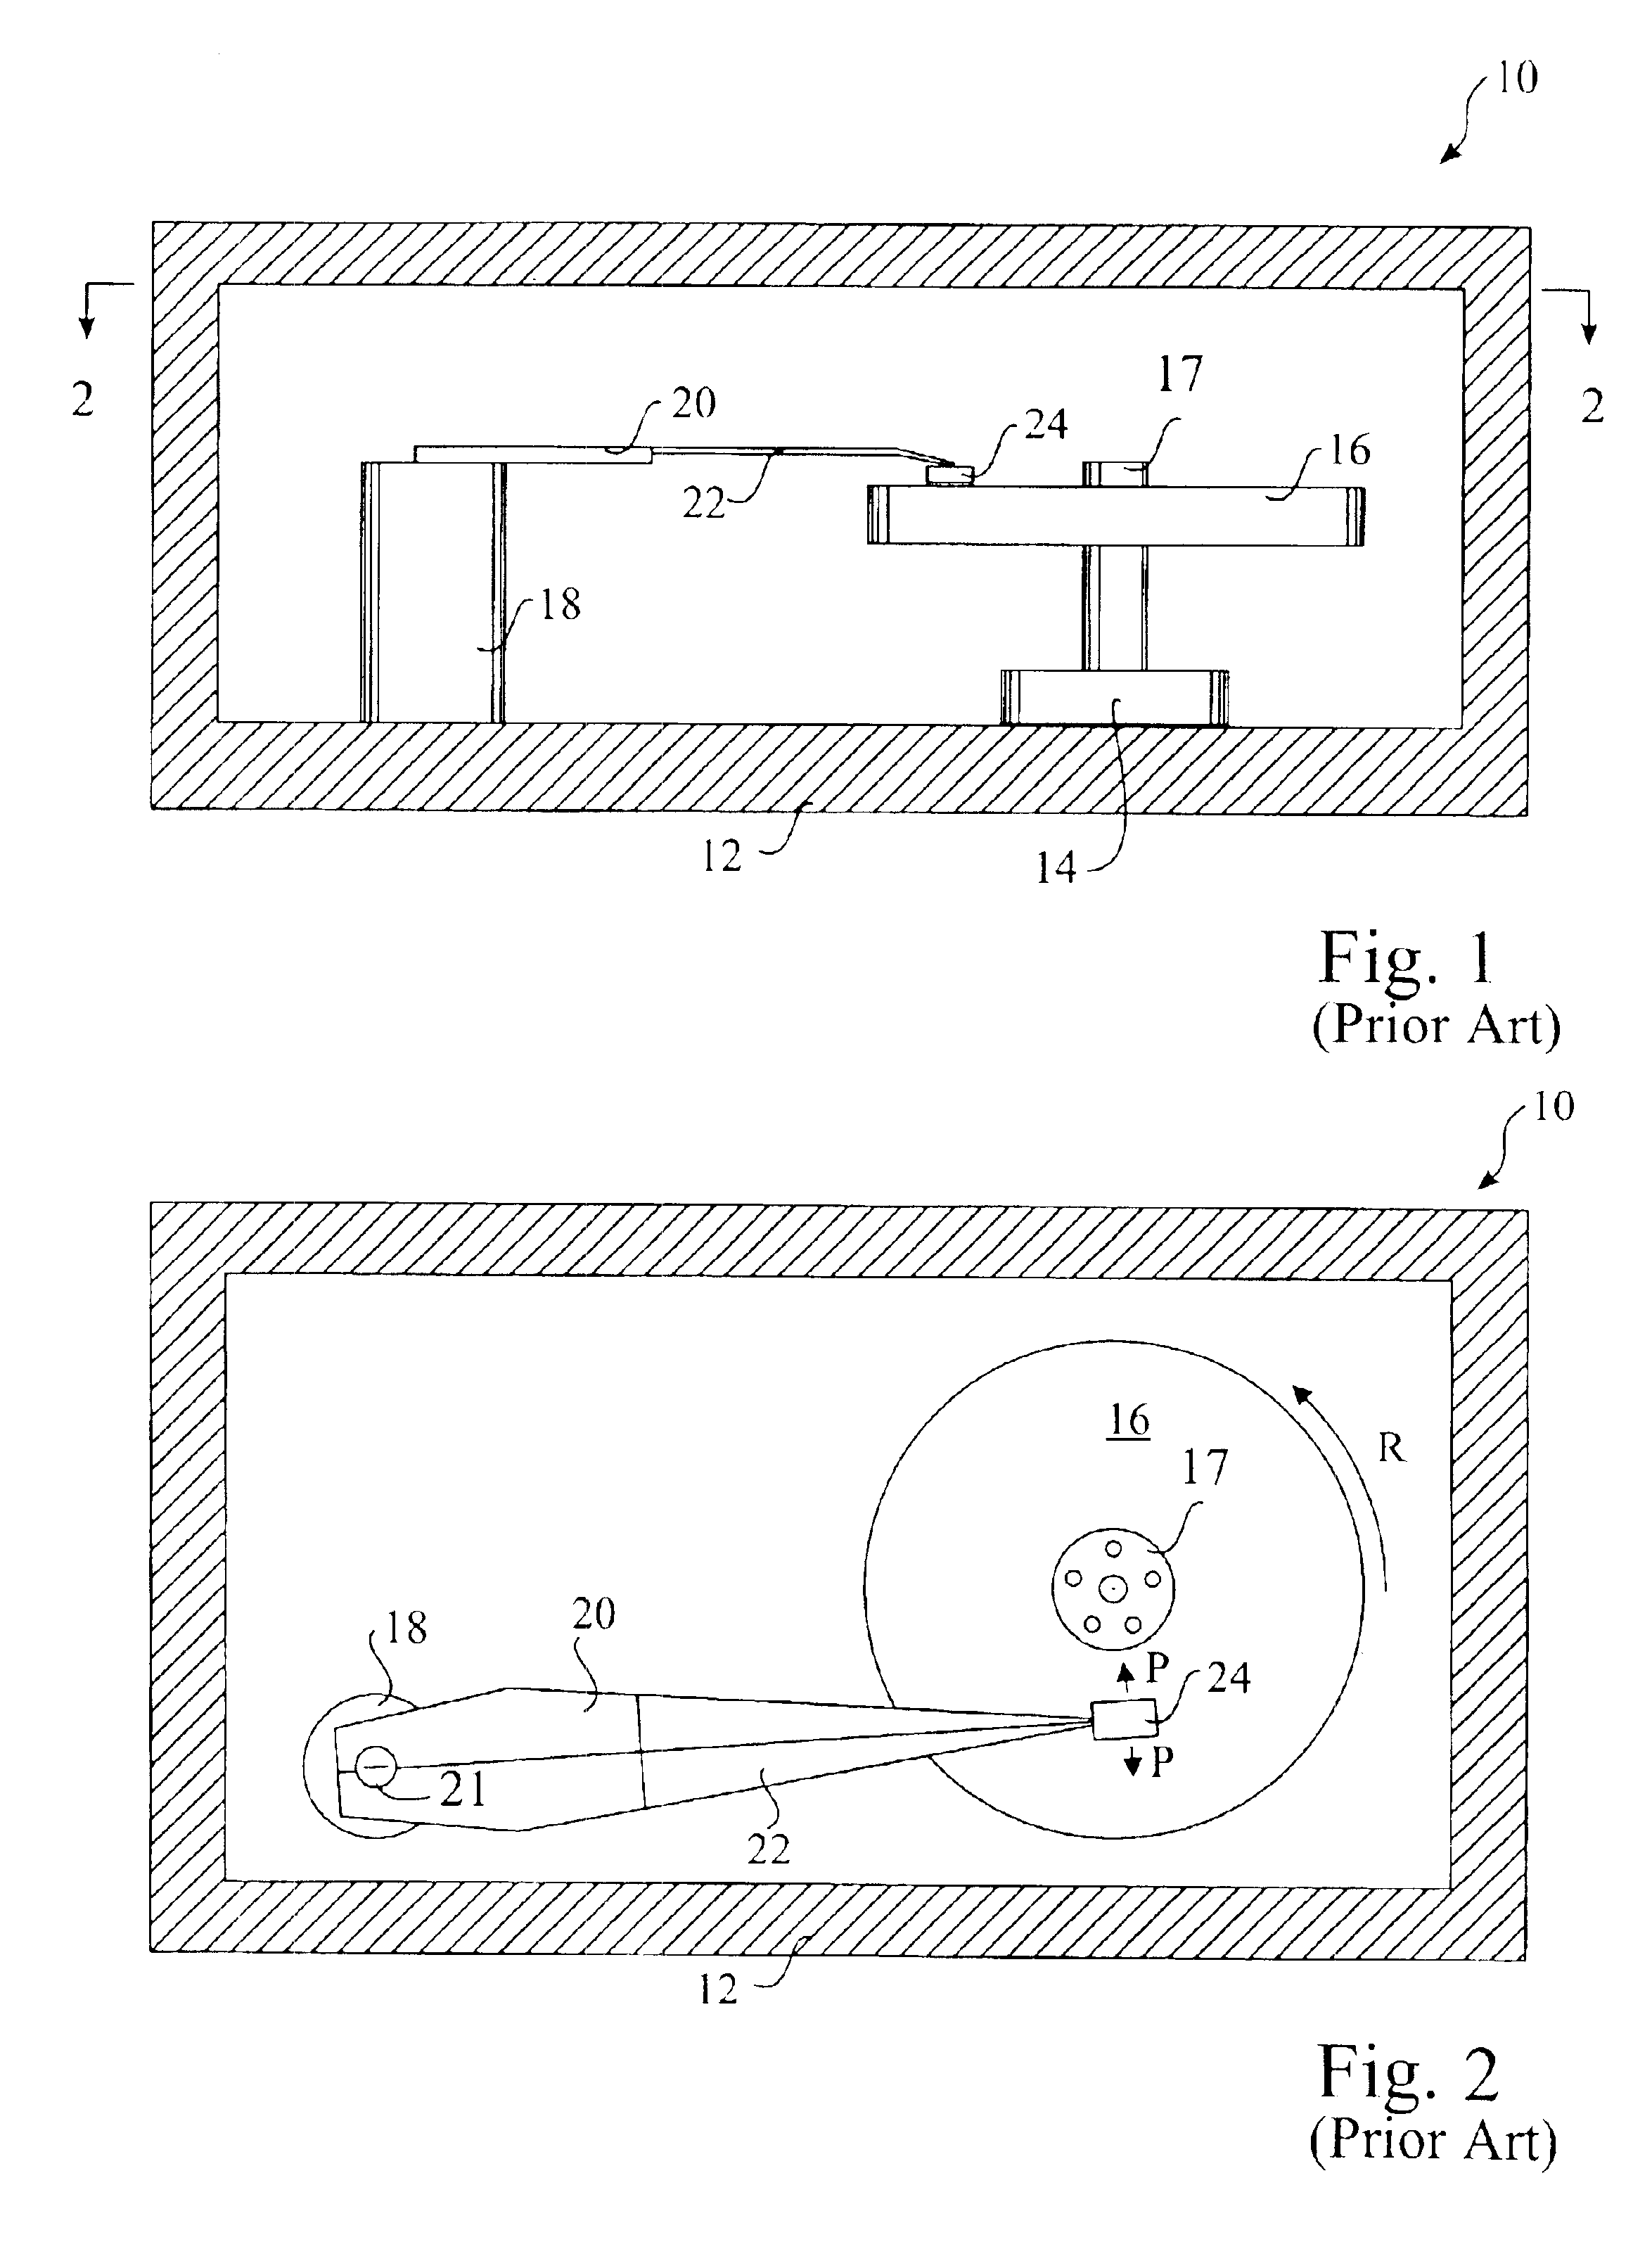 Air bearing having a cavity patch surface coplanar with a leading edge pad surface